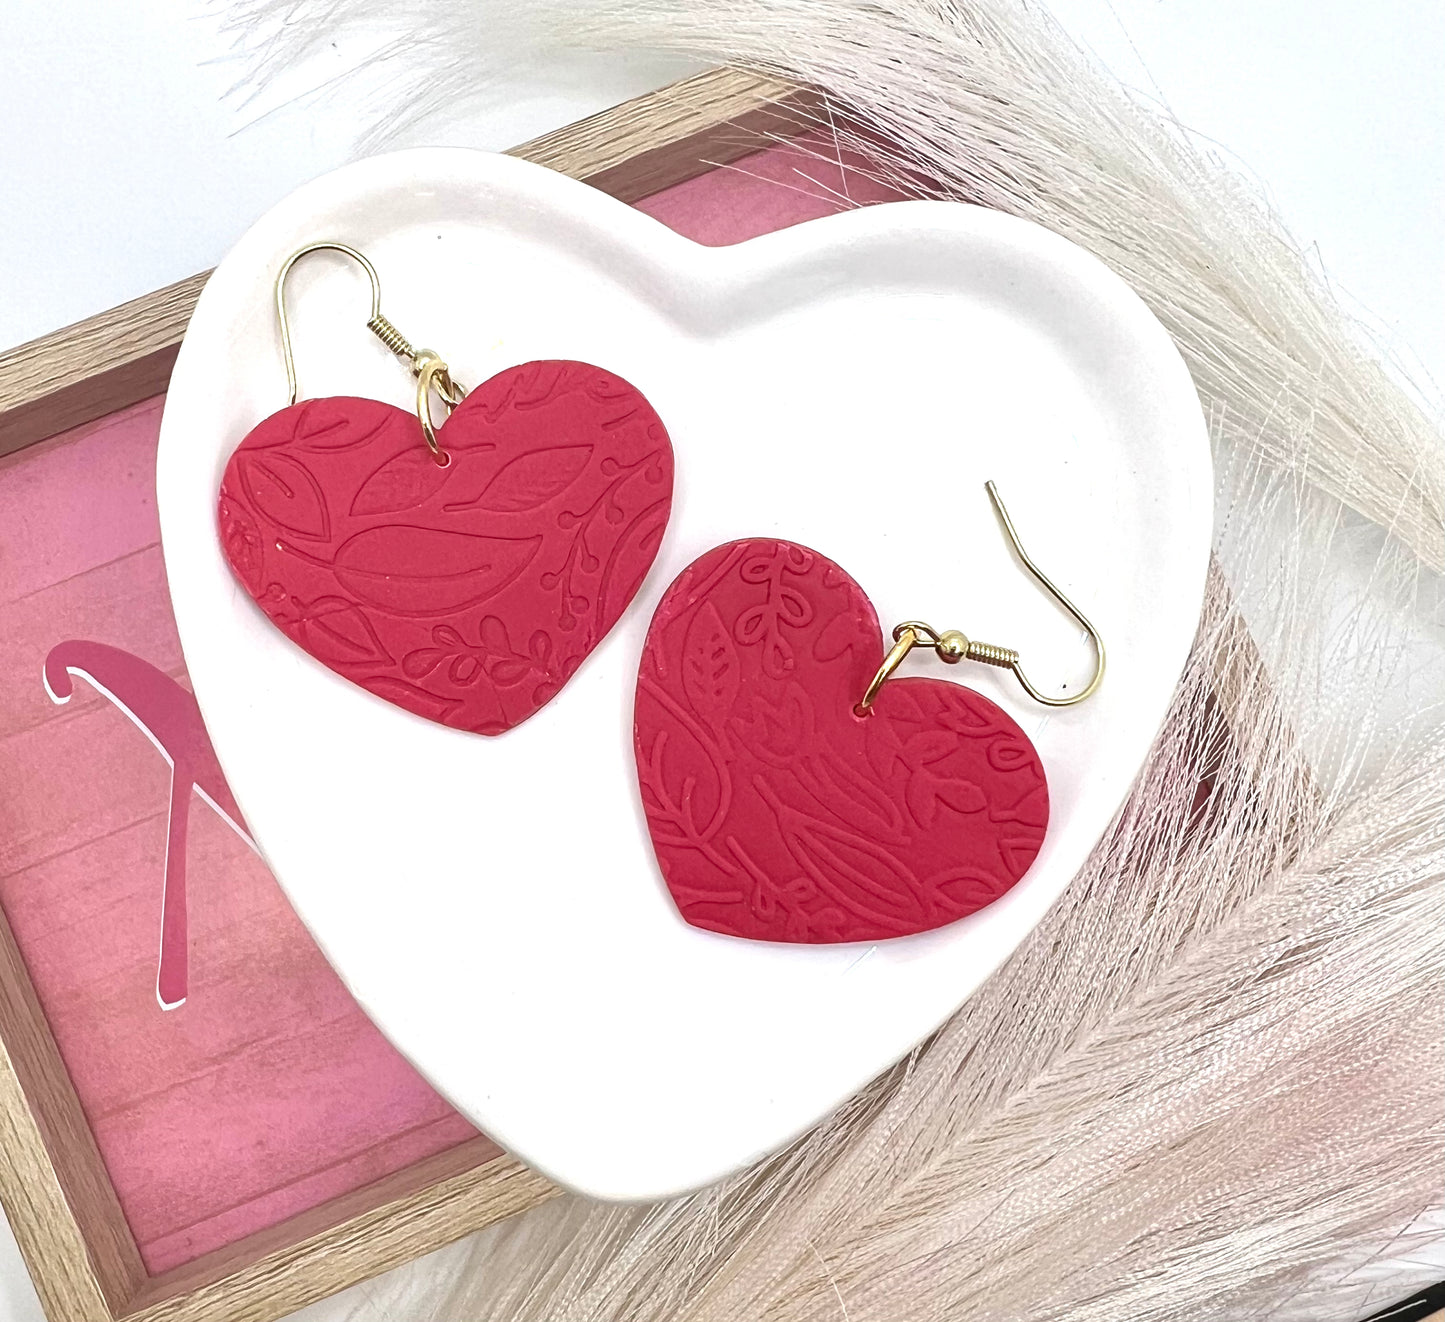 heart shaped earrings embossed with a floral pattern.  they are on gold fish hook style earrings.